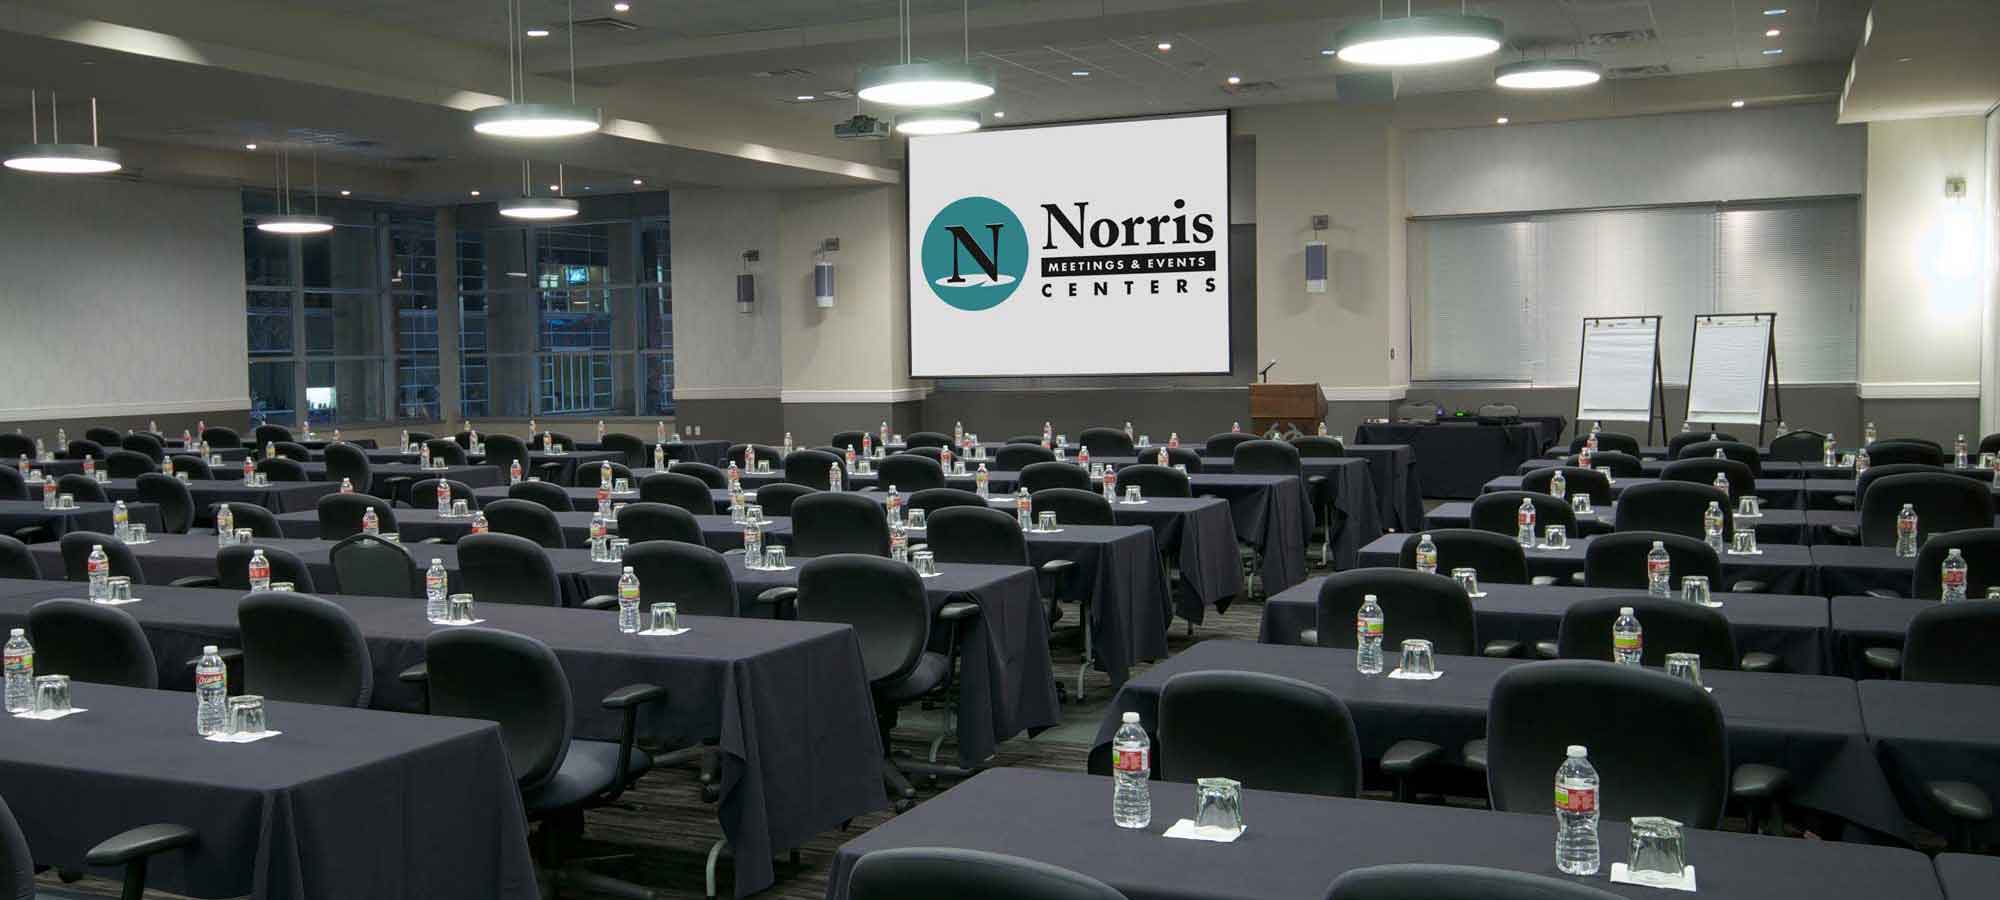 Norris Conference Centers meeting room setup and waiting for participants